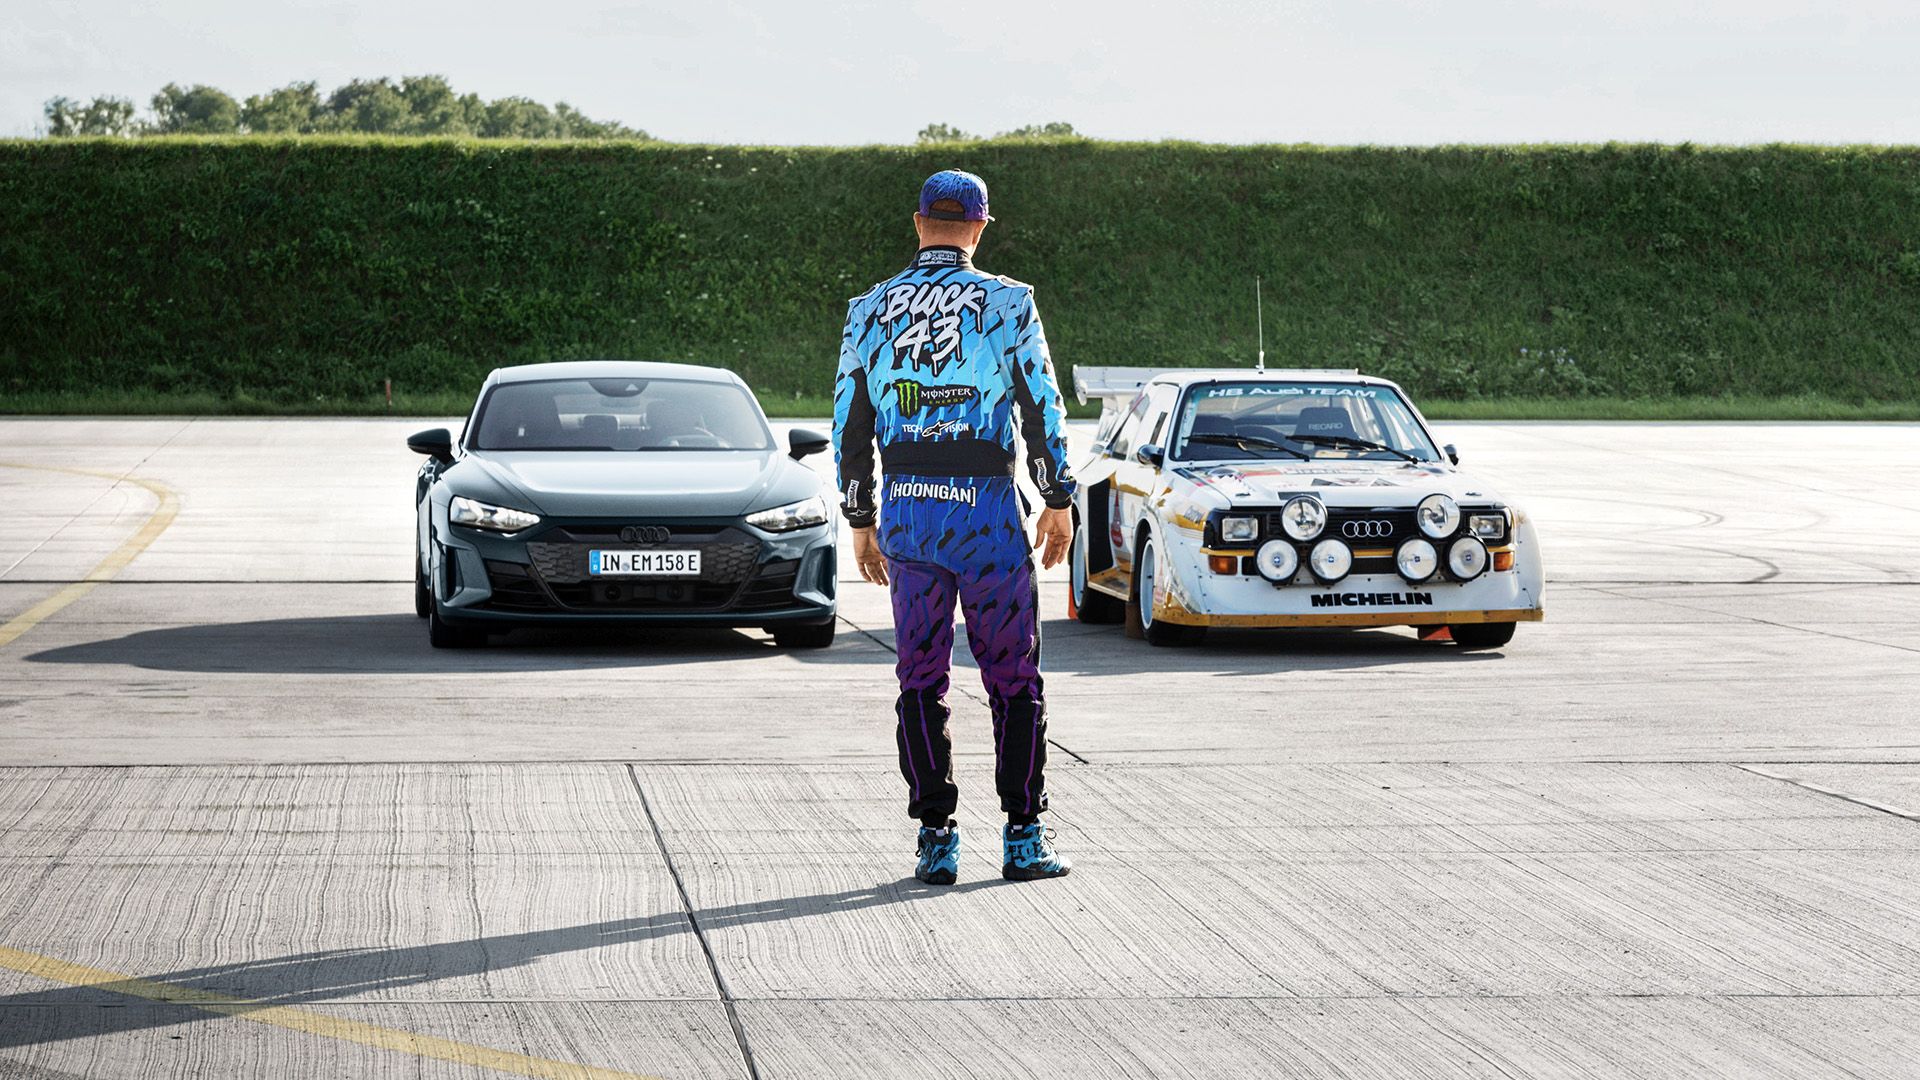 Ken Block stands with his back to the camera in front of two Audi models.